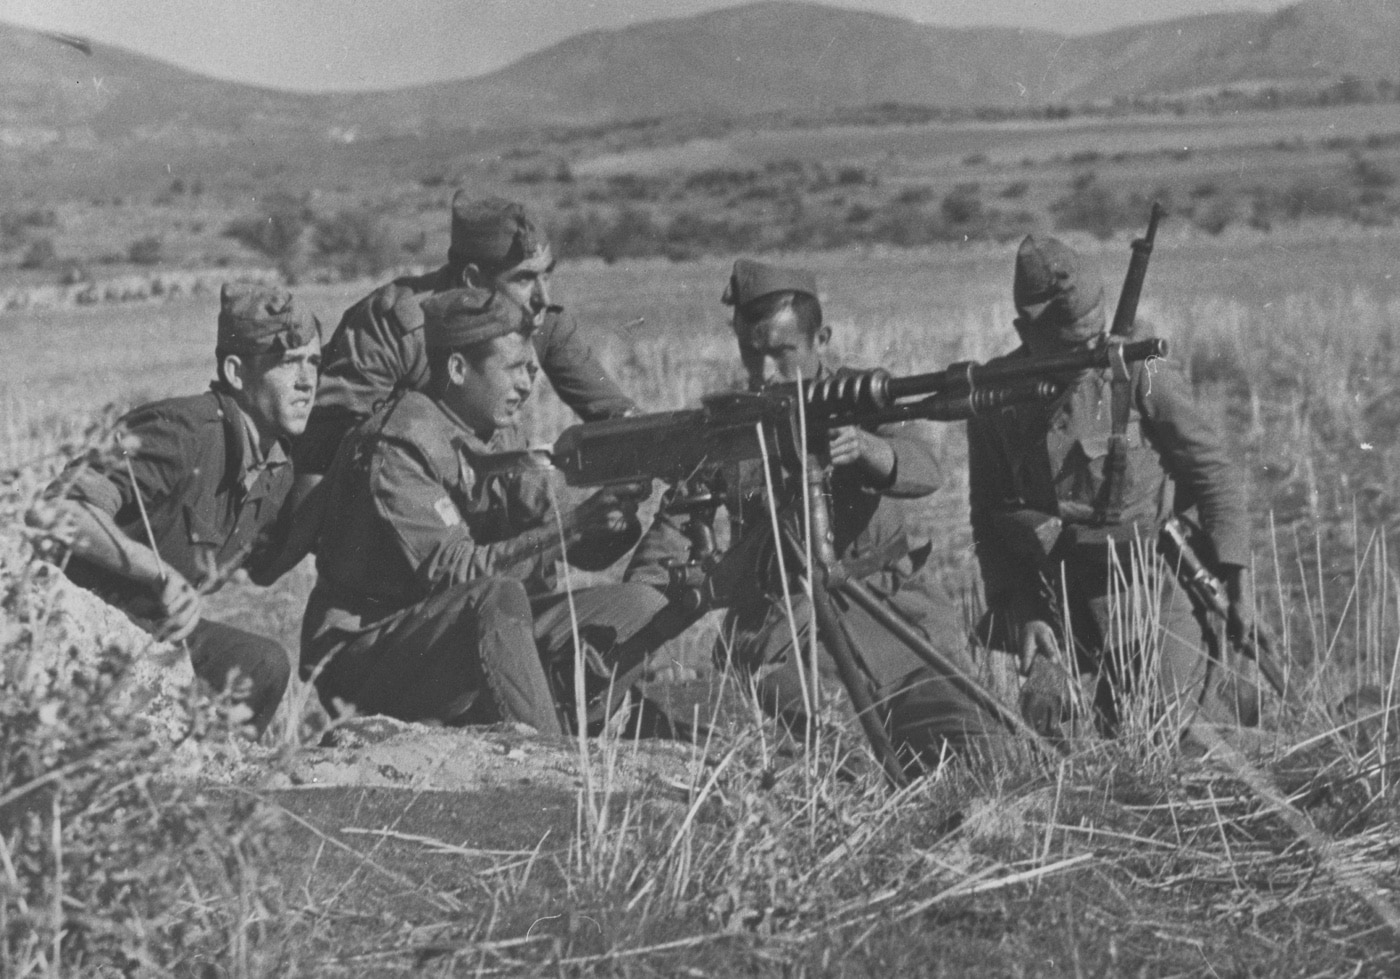 This photo captures five Spanish soldiers training with the machine gun Hotchkiss in the fall of 1942. The gun remained in service around the world for many years after its initial manufacture by the French Arms company. 